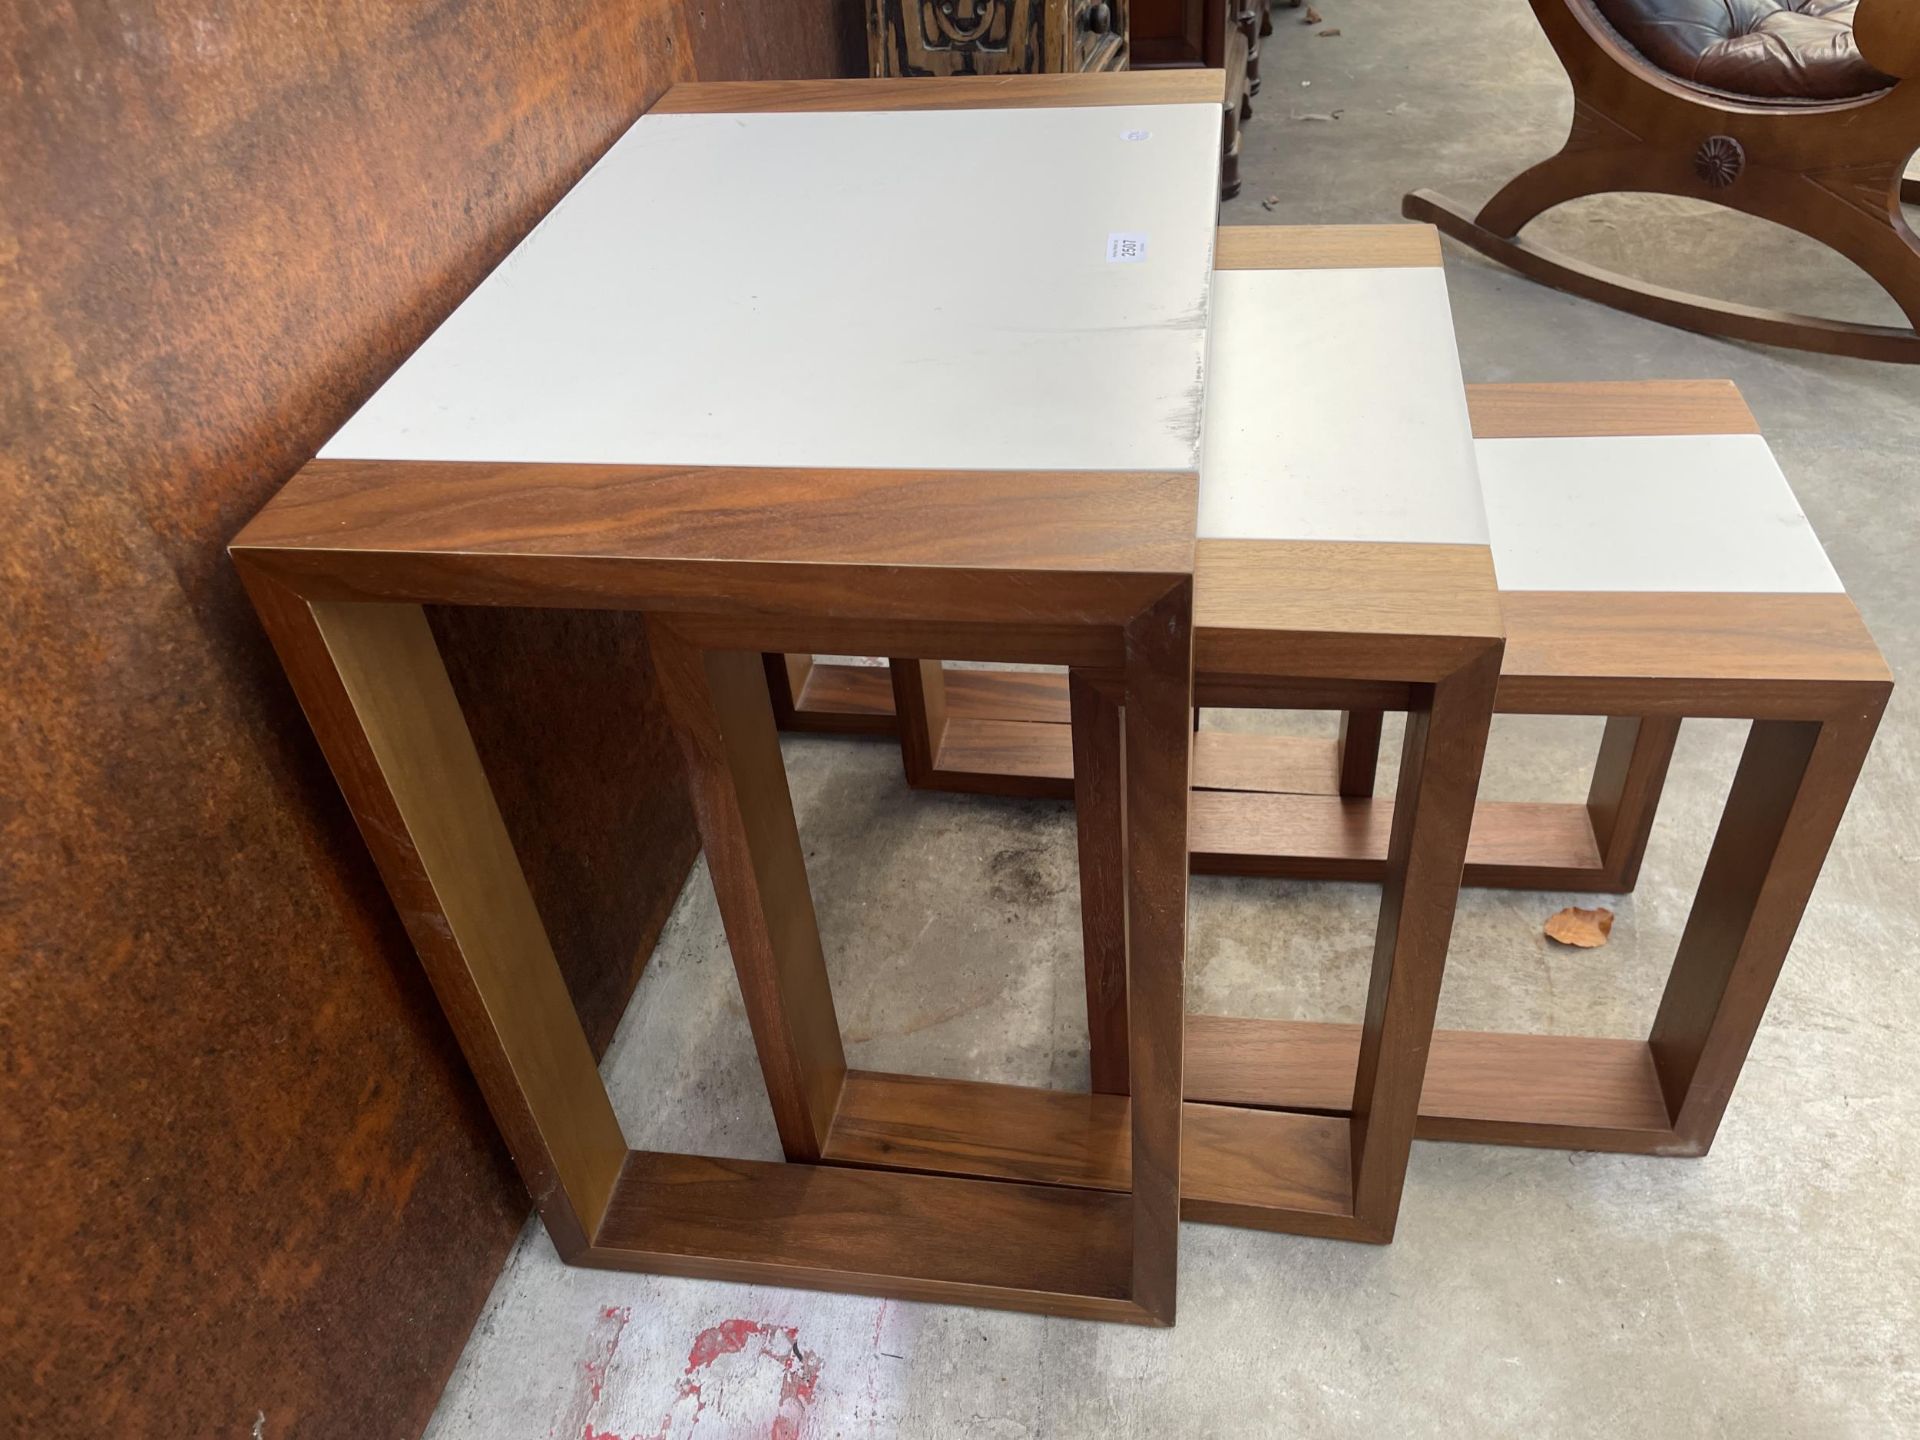 A RETRO TEAK AND MELAMINE NEST OF THREE TABLES - Image 3 of 3